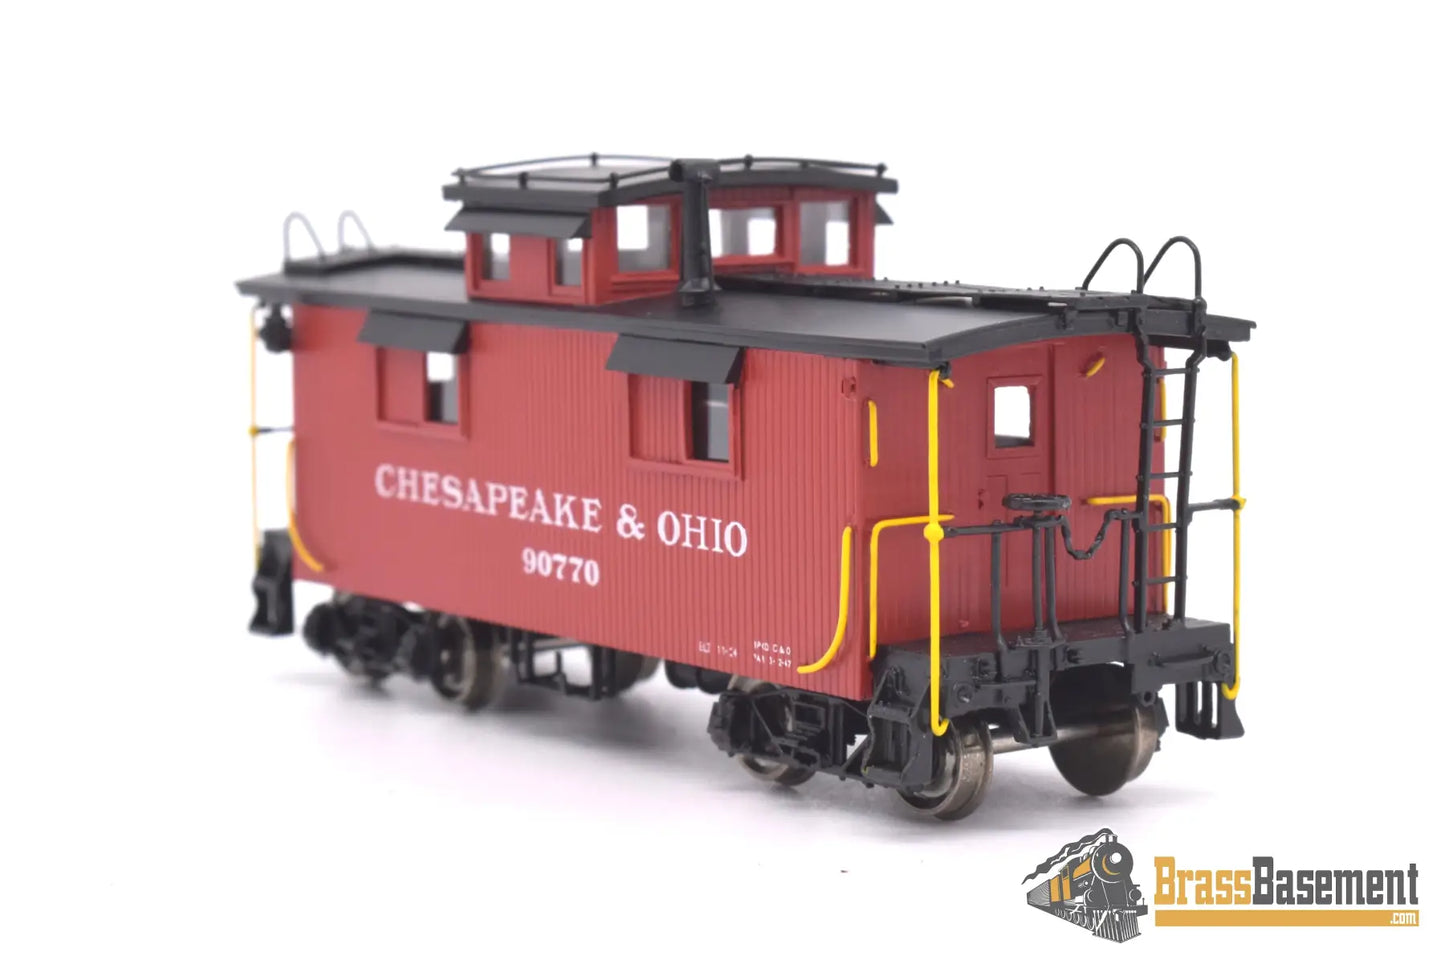 Ho Brass - Div Chesapeake & Ohio C&O 6 Window Cupola Caboose #90770 Factory Painted Red